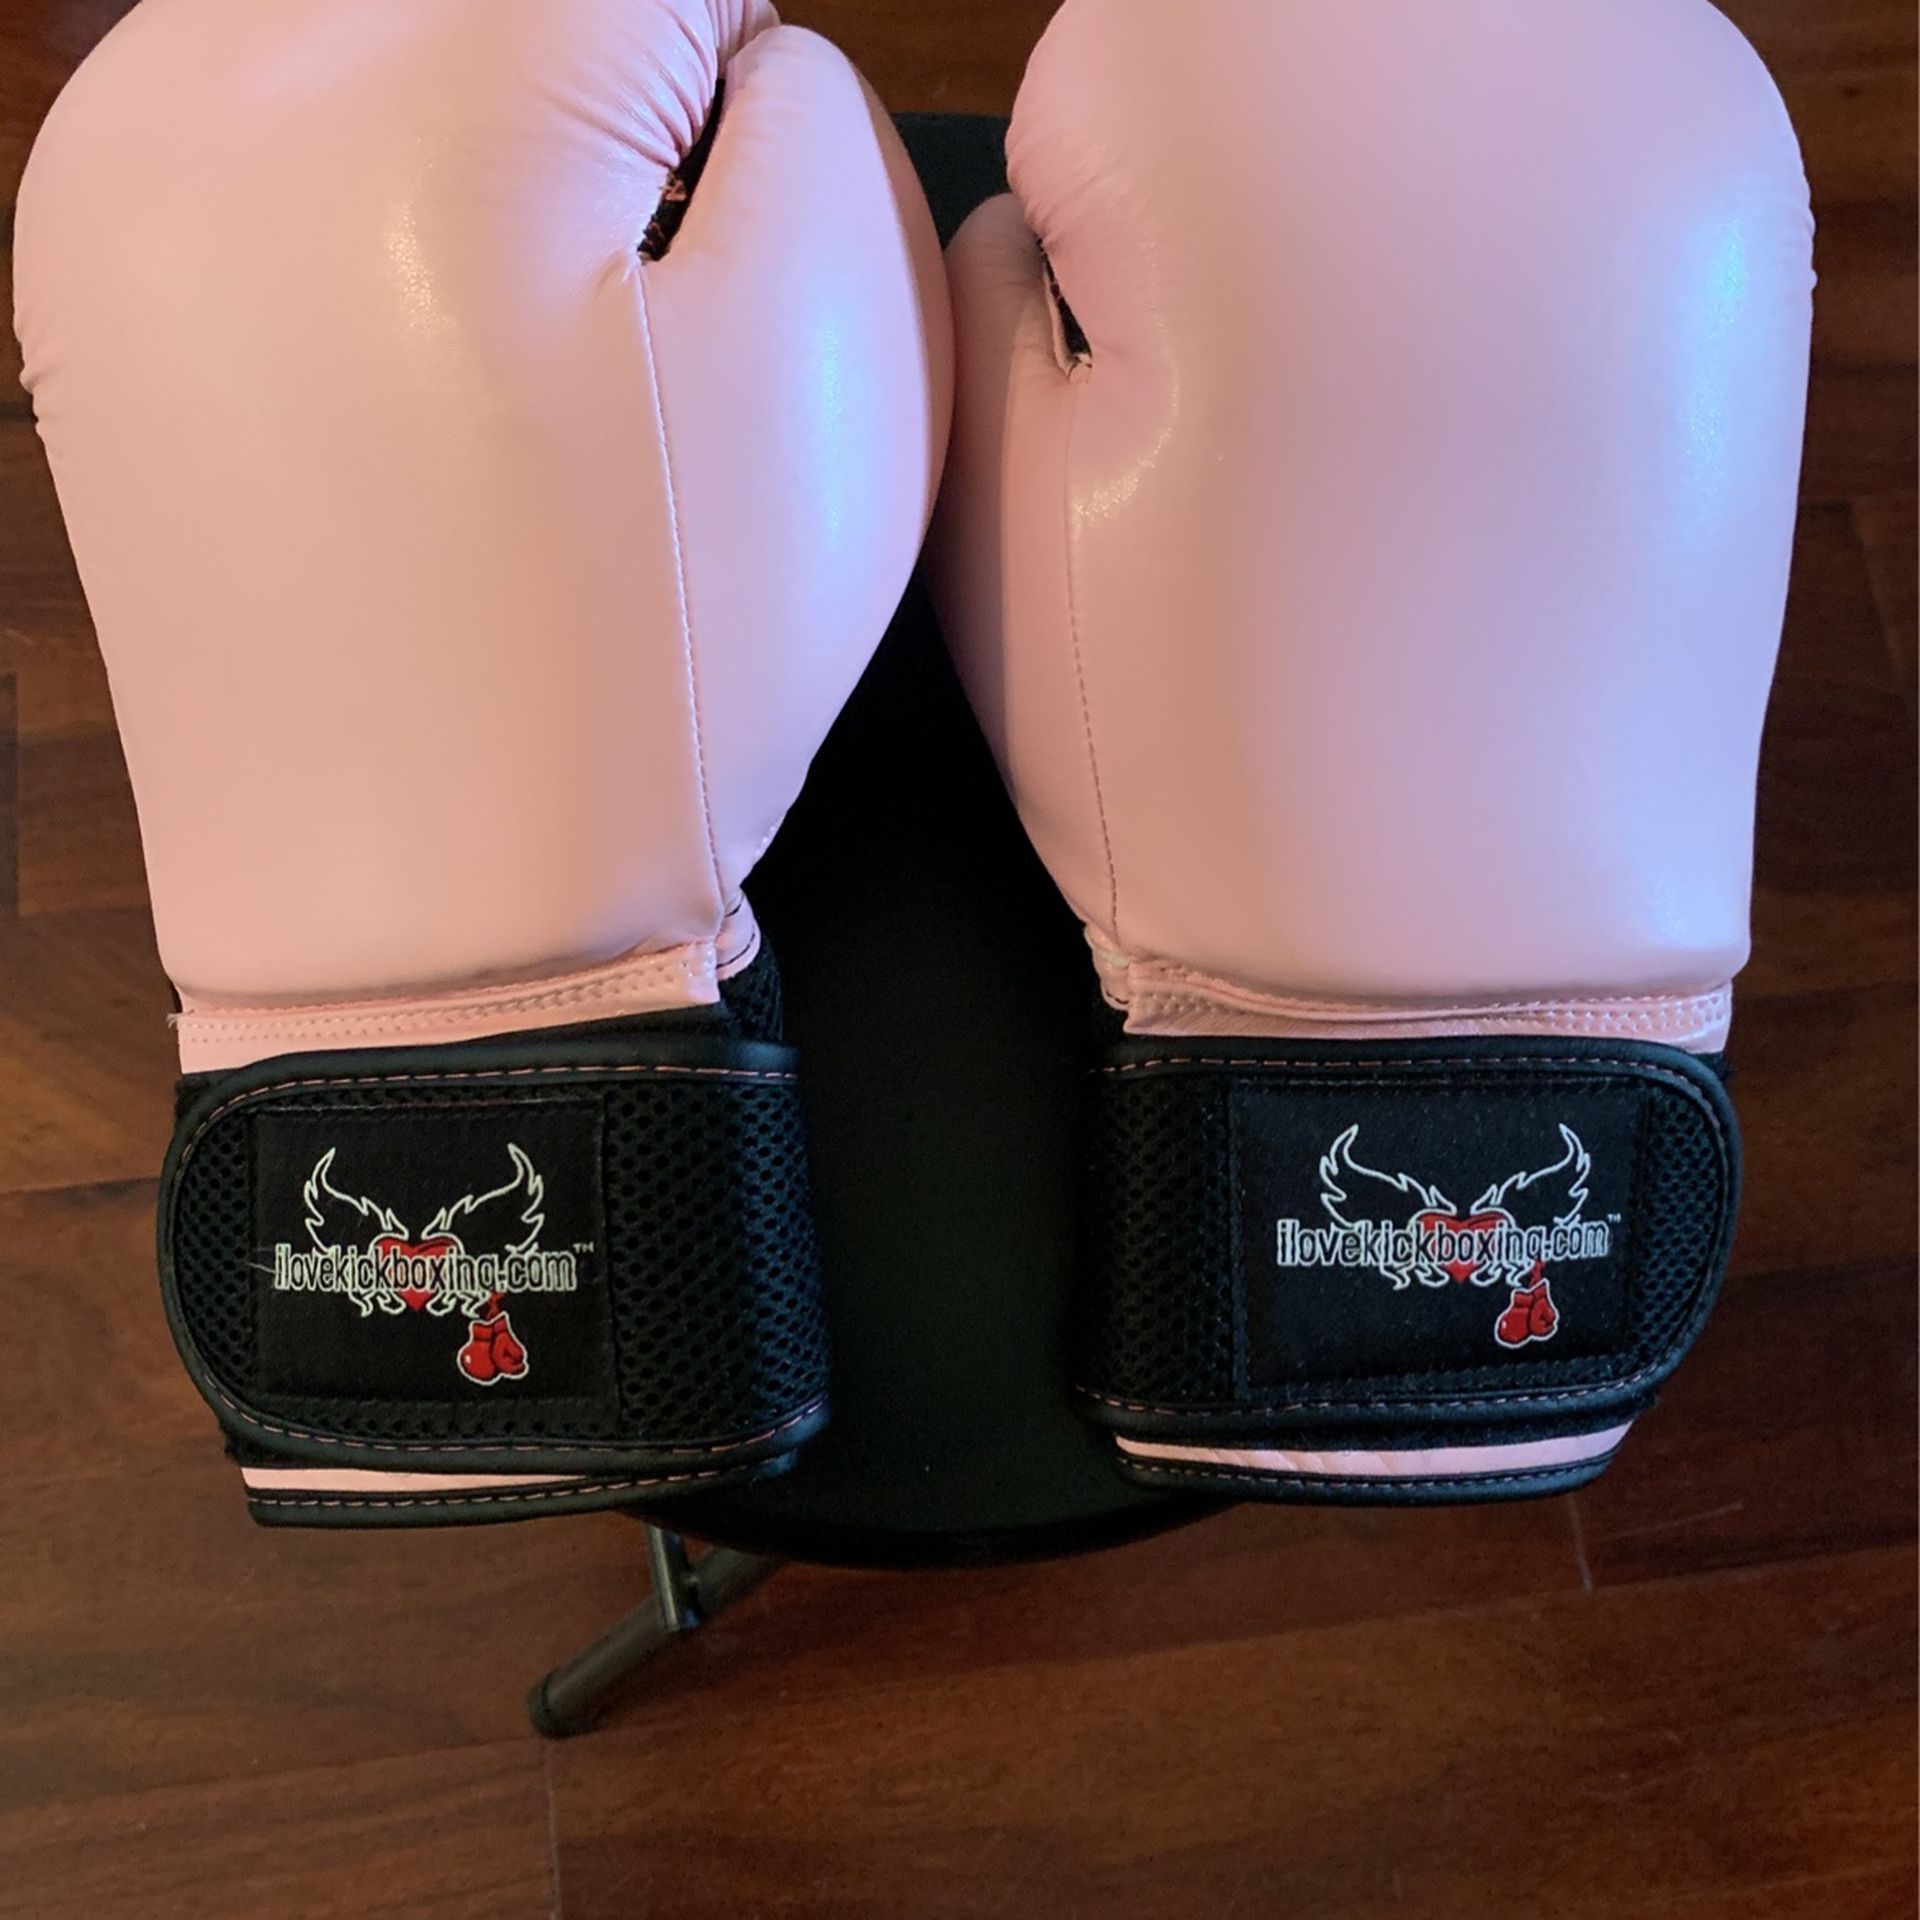 Century 12 0unce Boxing Gloves, Pink In Color .